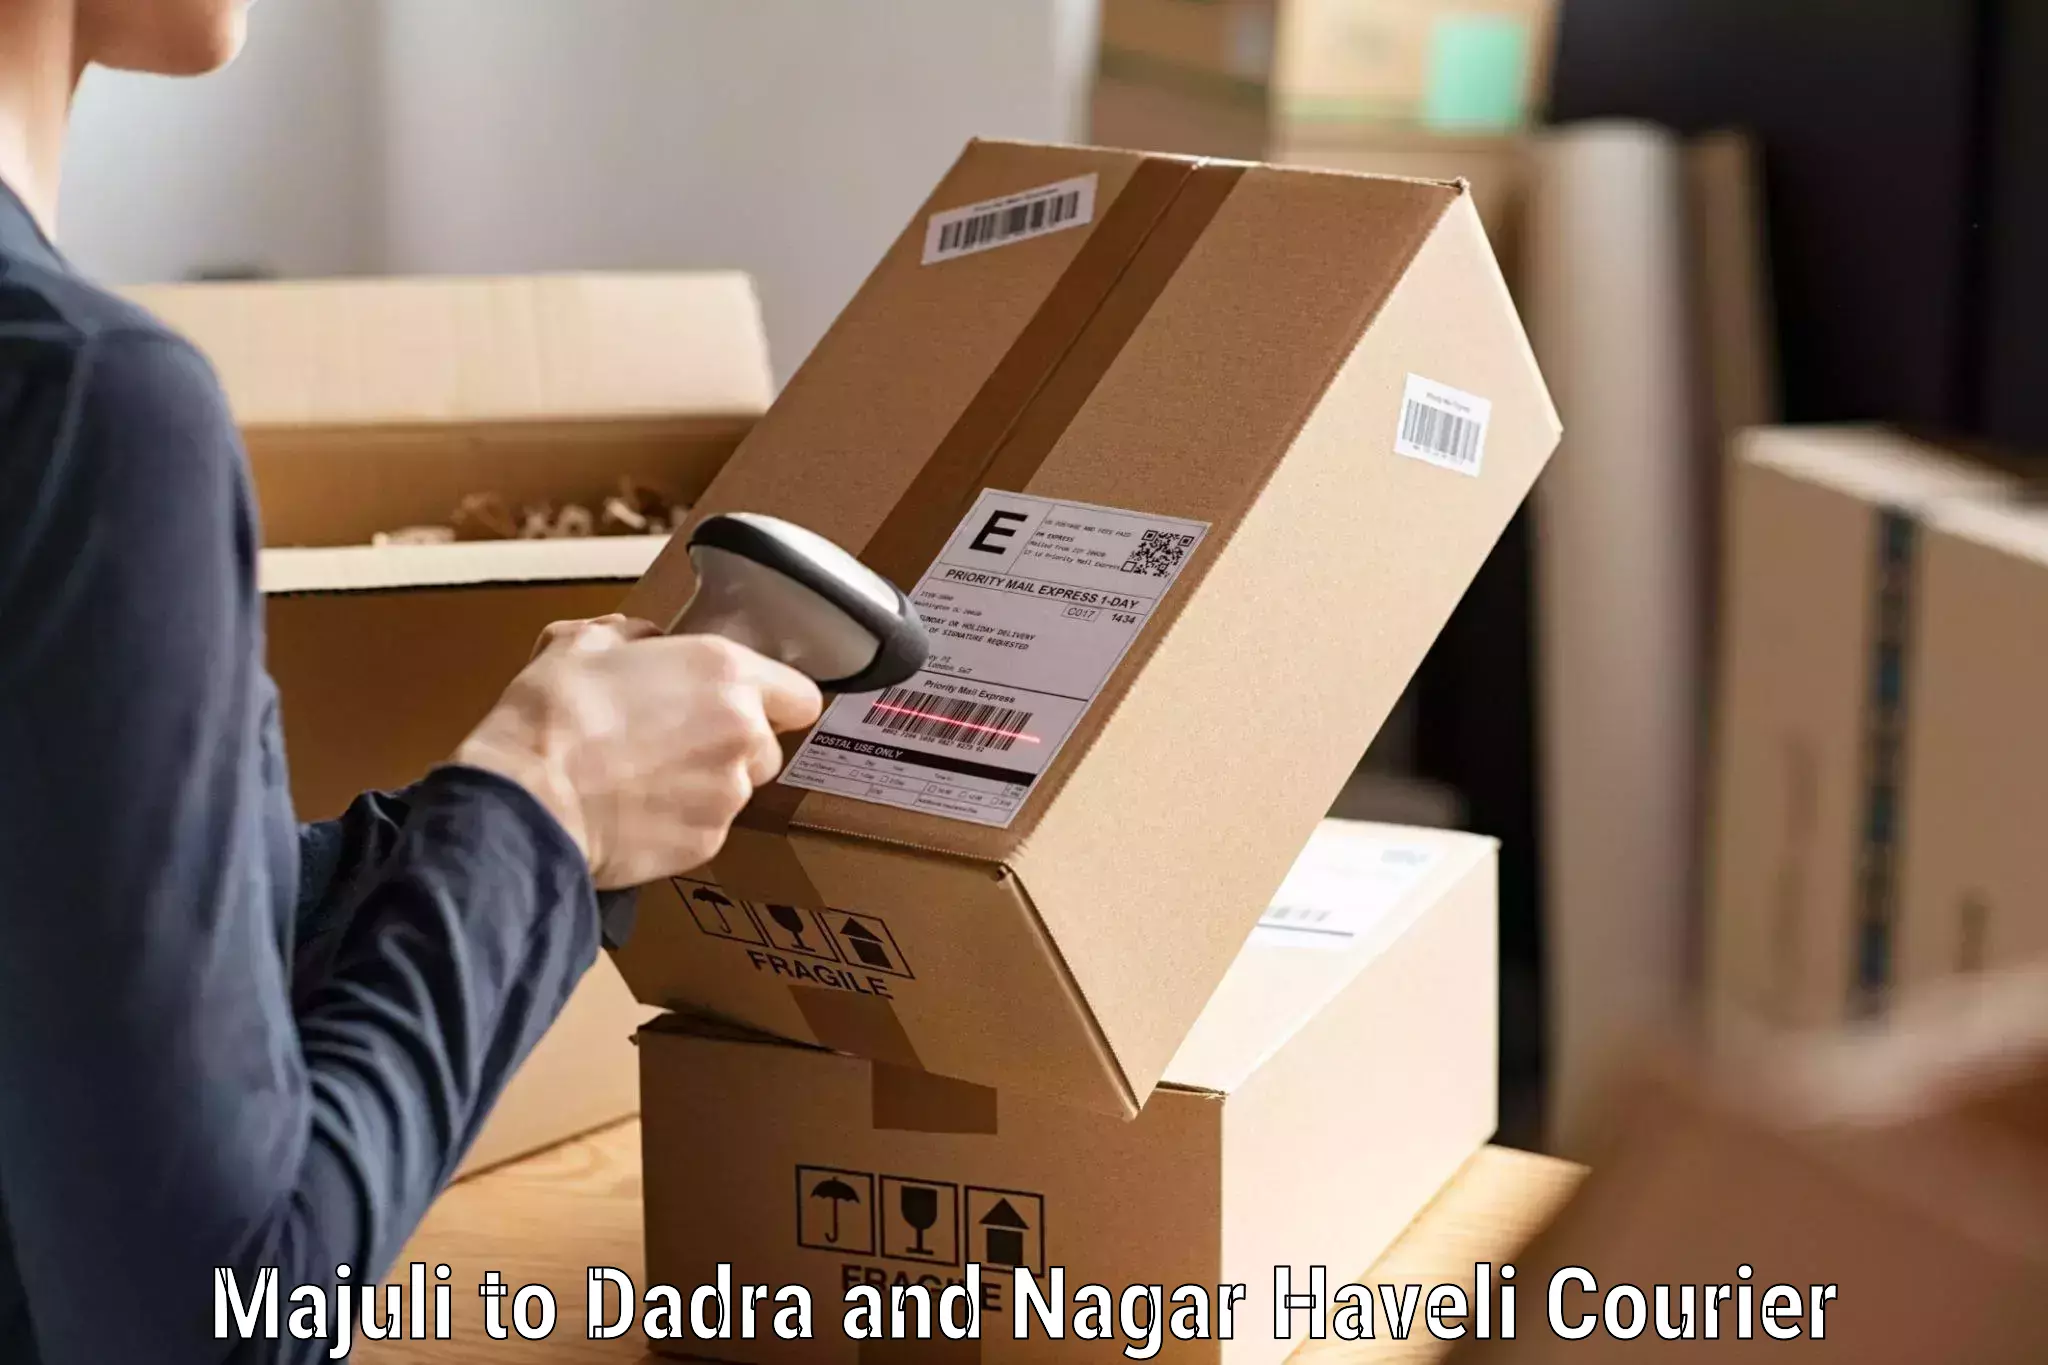 Professional courier services Majuli to Dadra and Nagar Haveli